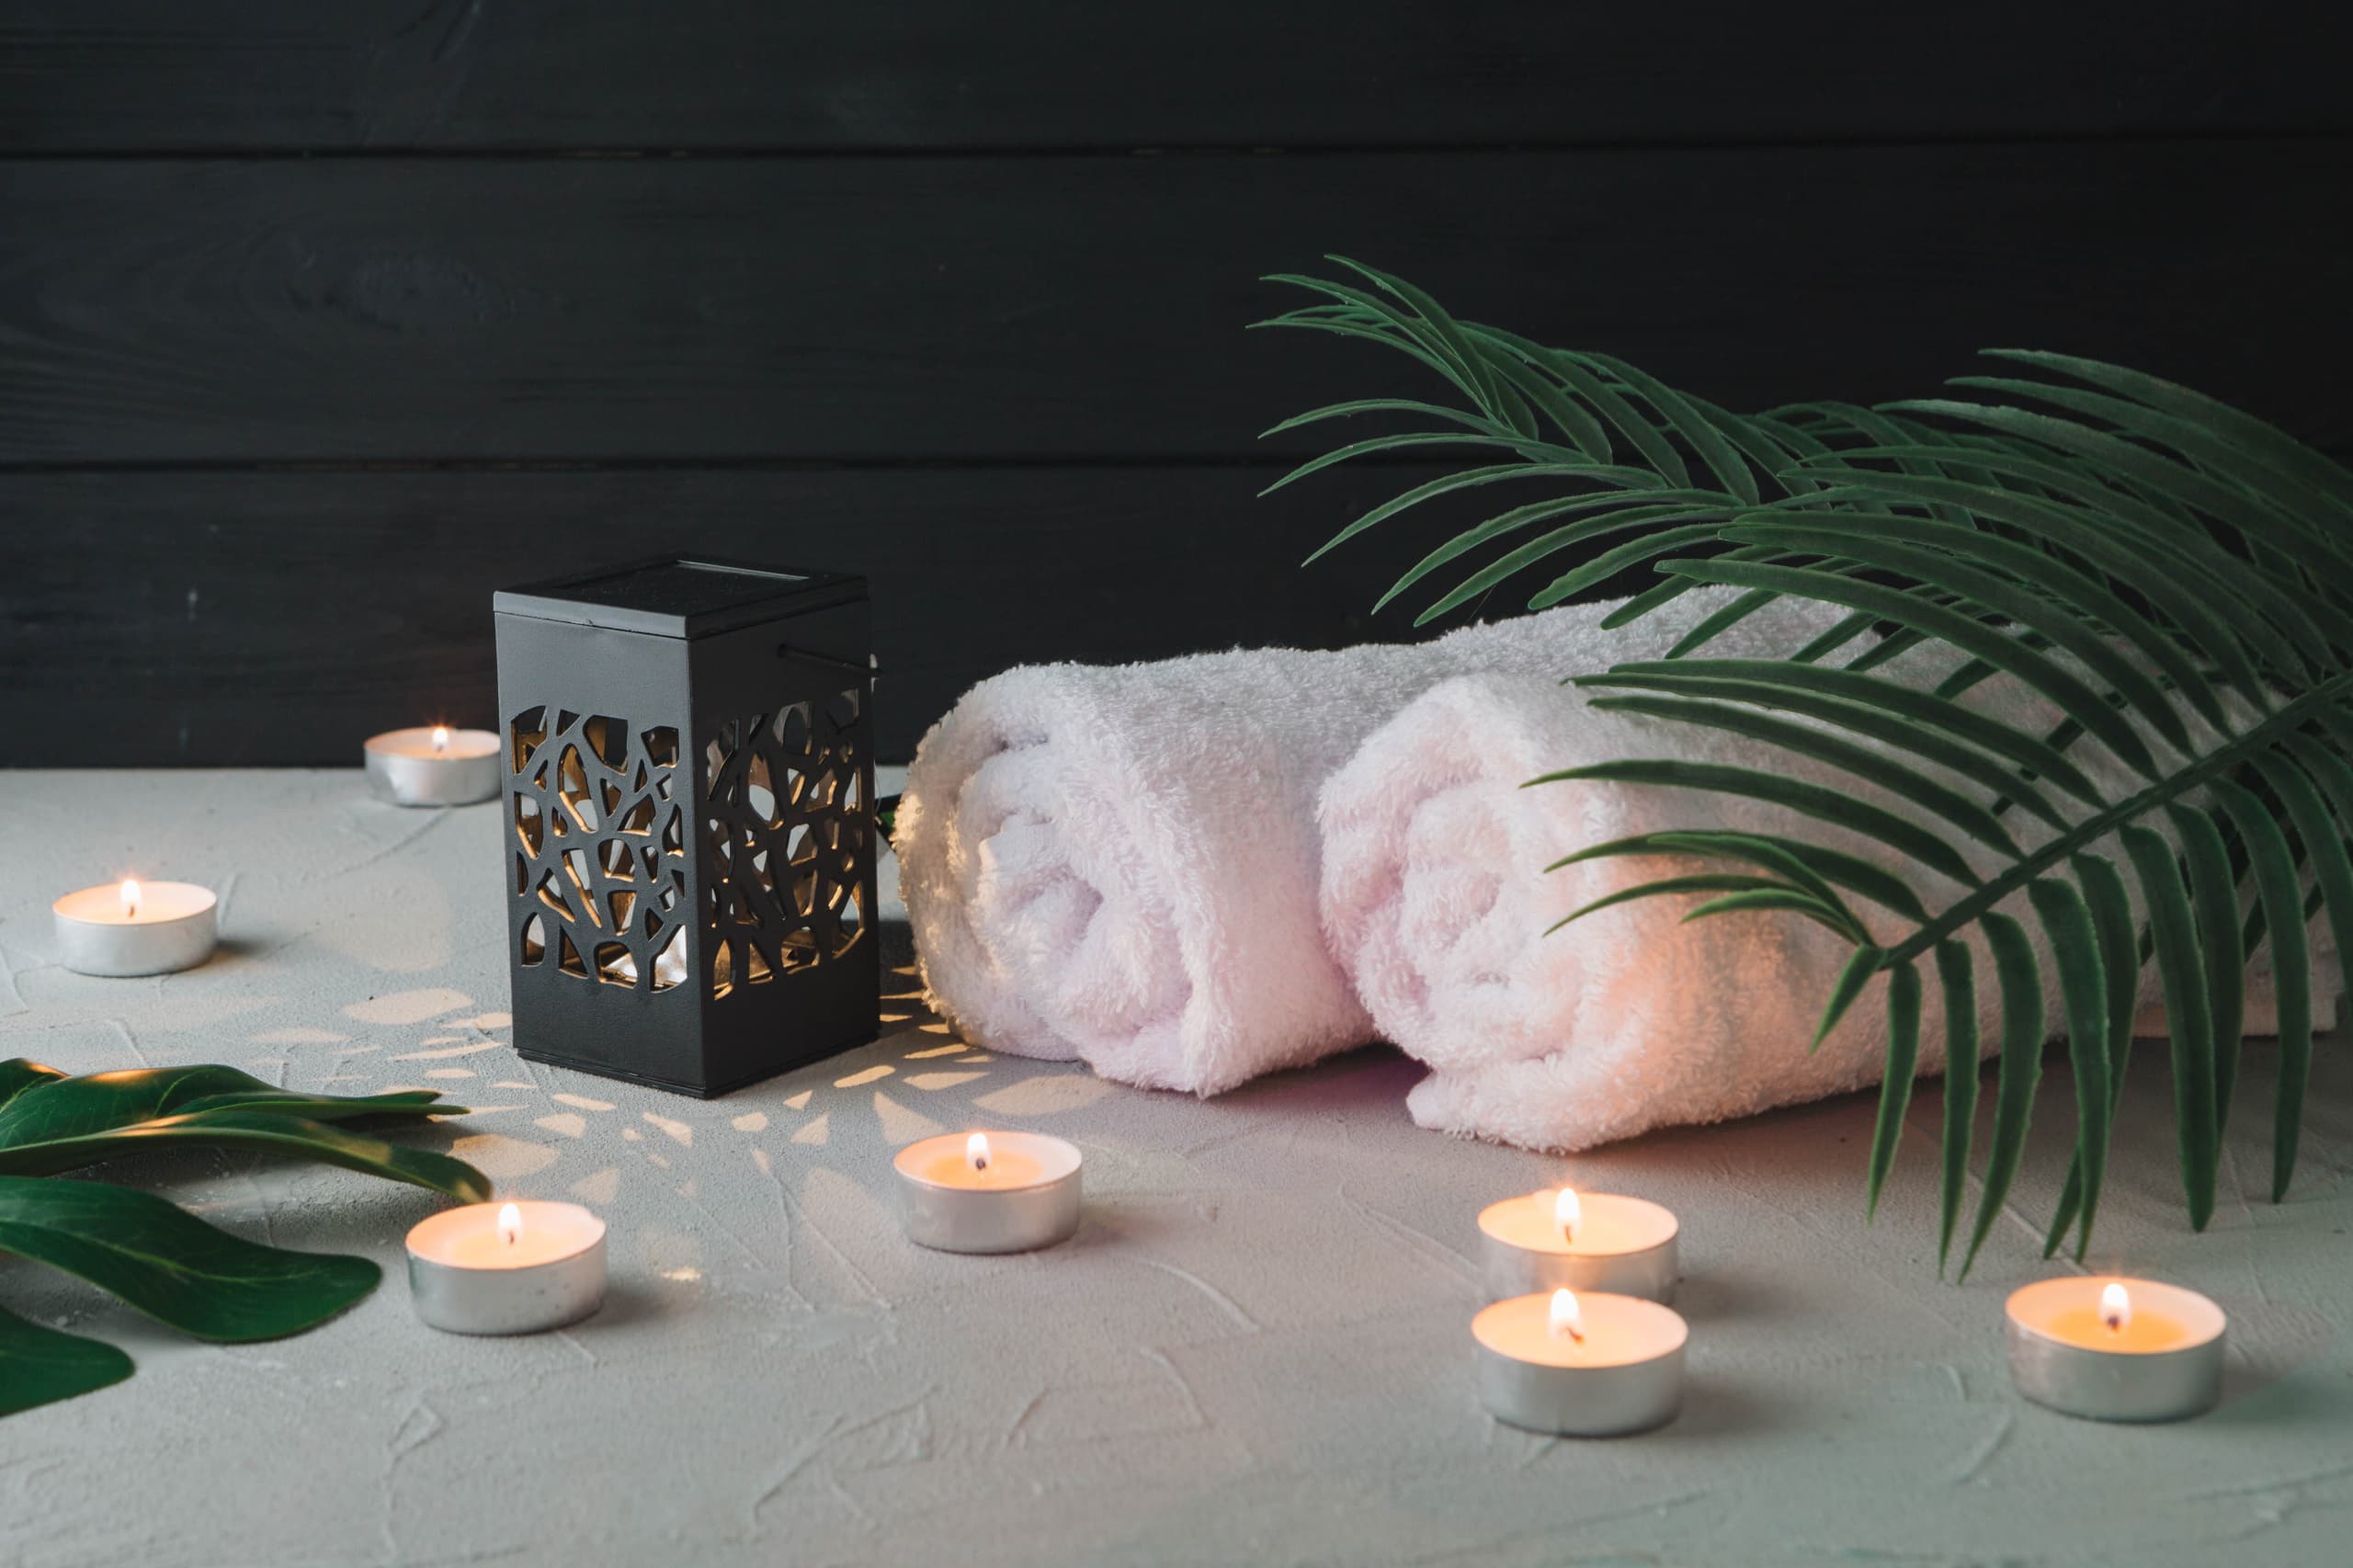 natural-elements-for-spa-with-candles.jpg